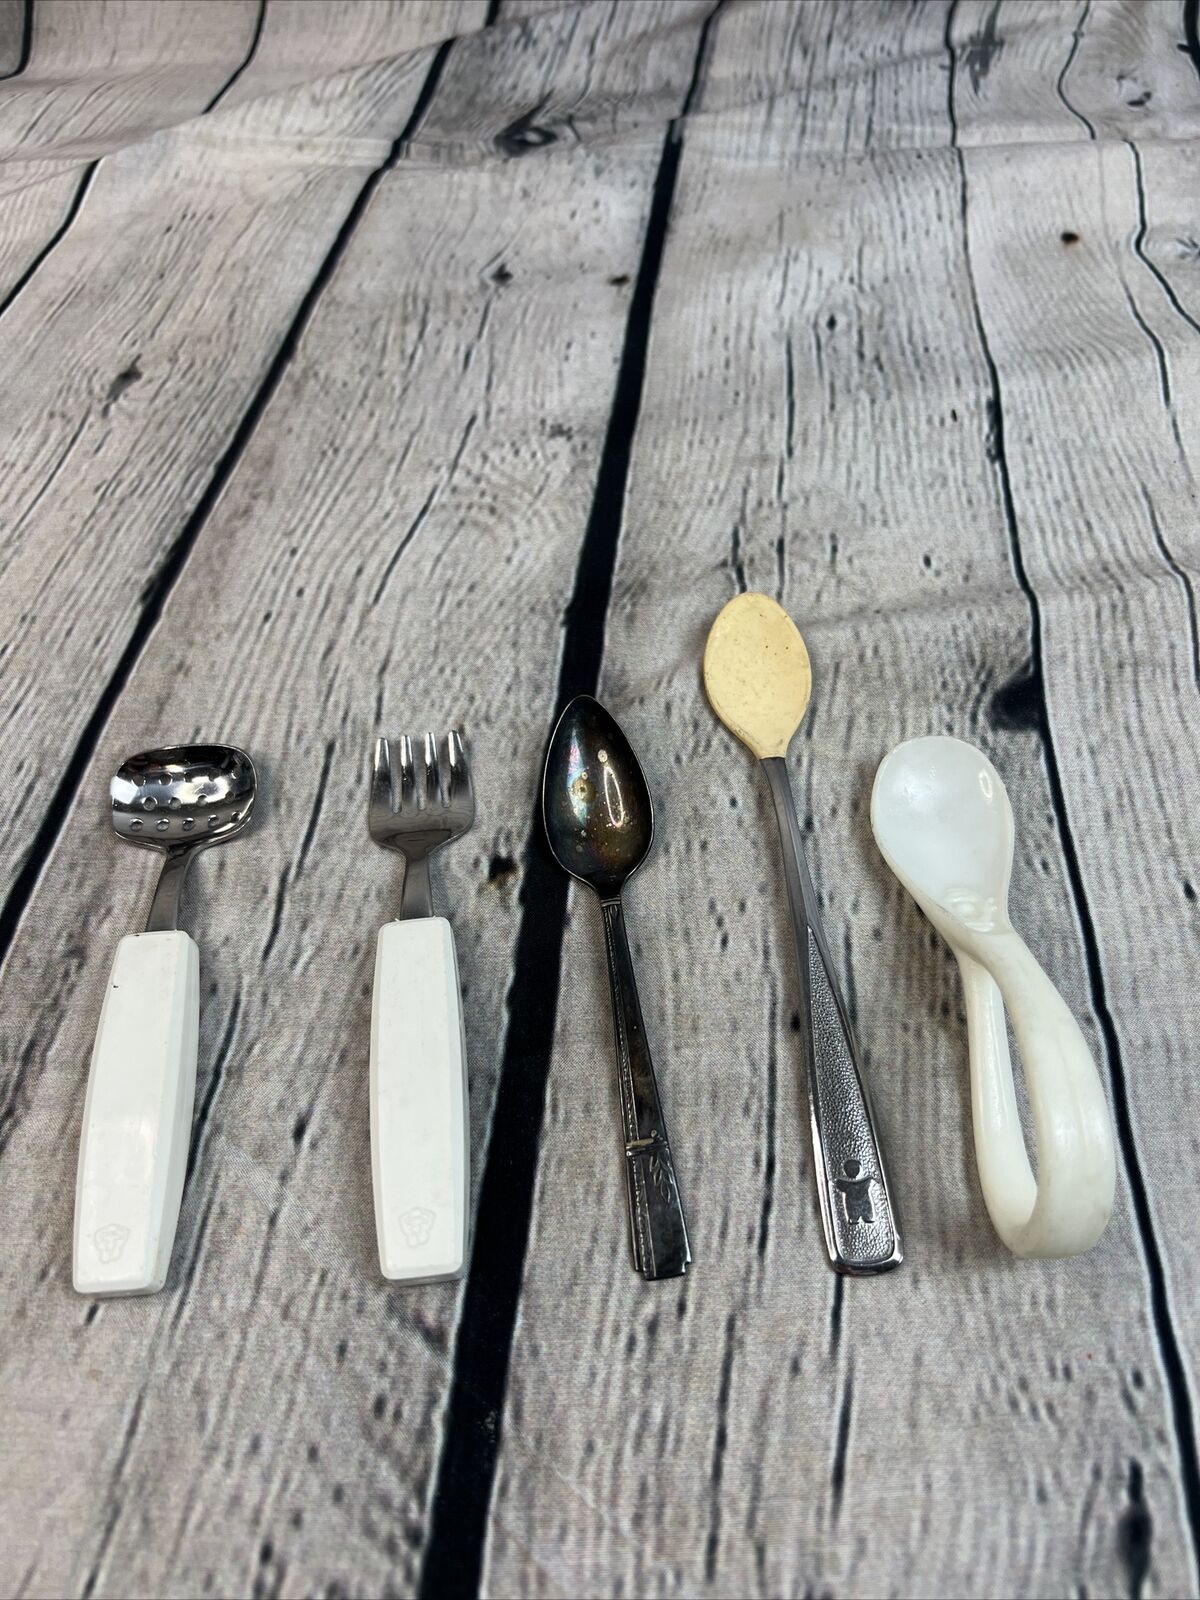 LOT OF 5 Vintage Baby Spoons And Forks